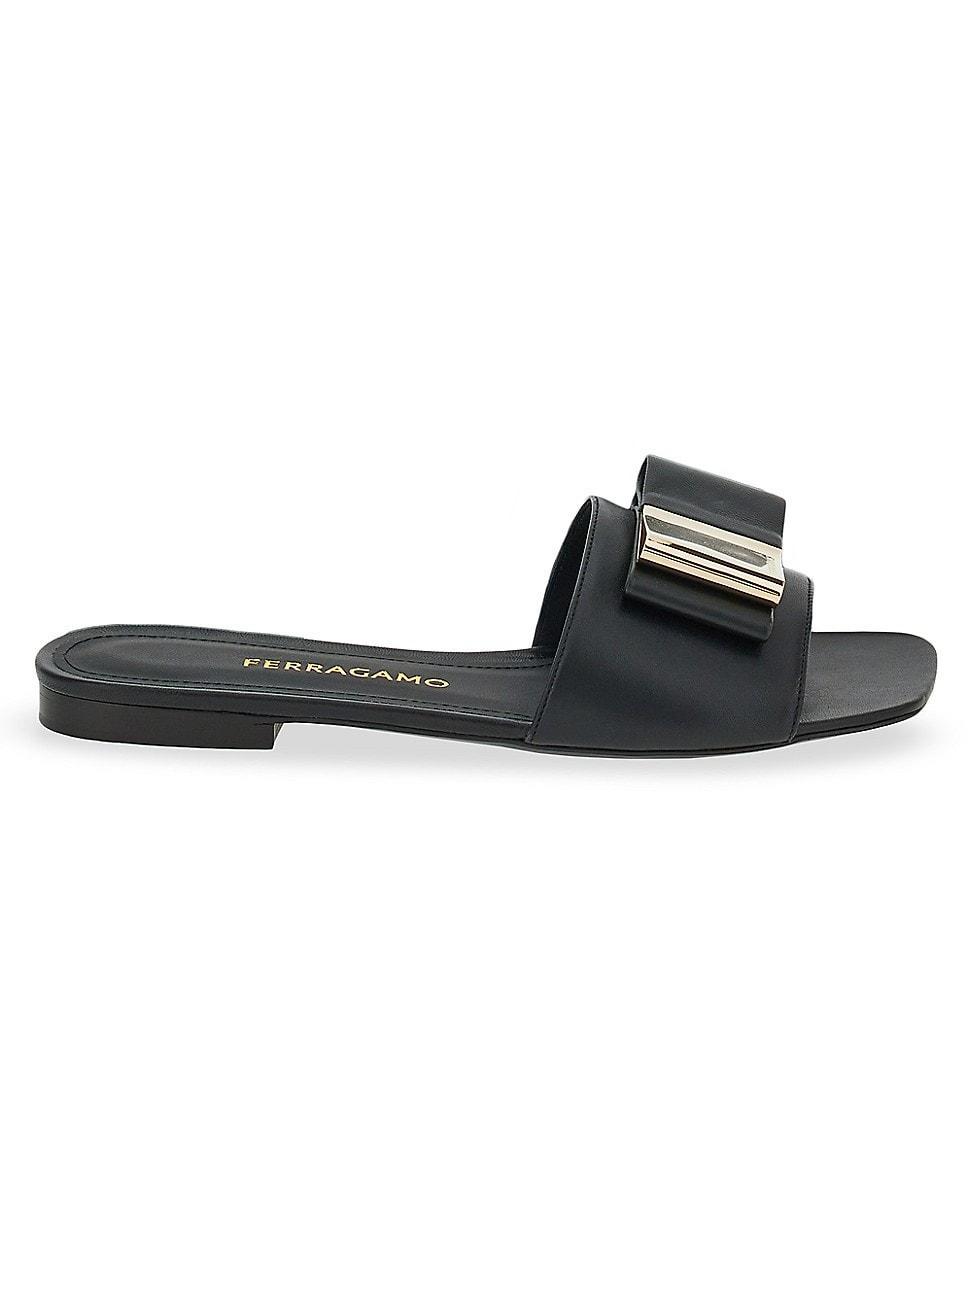 Womens Lyana Leather Slide Sandals Product Image